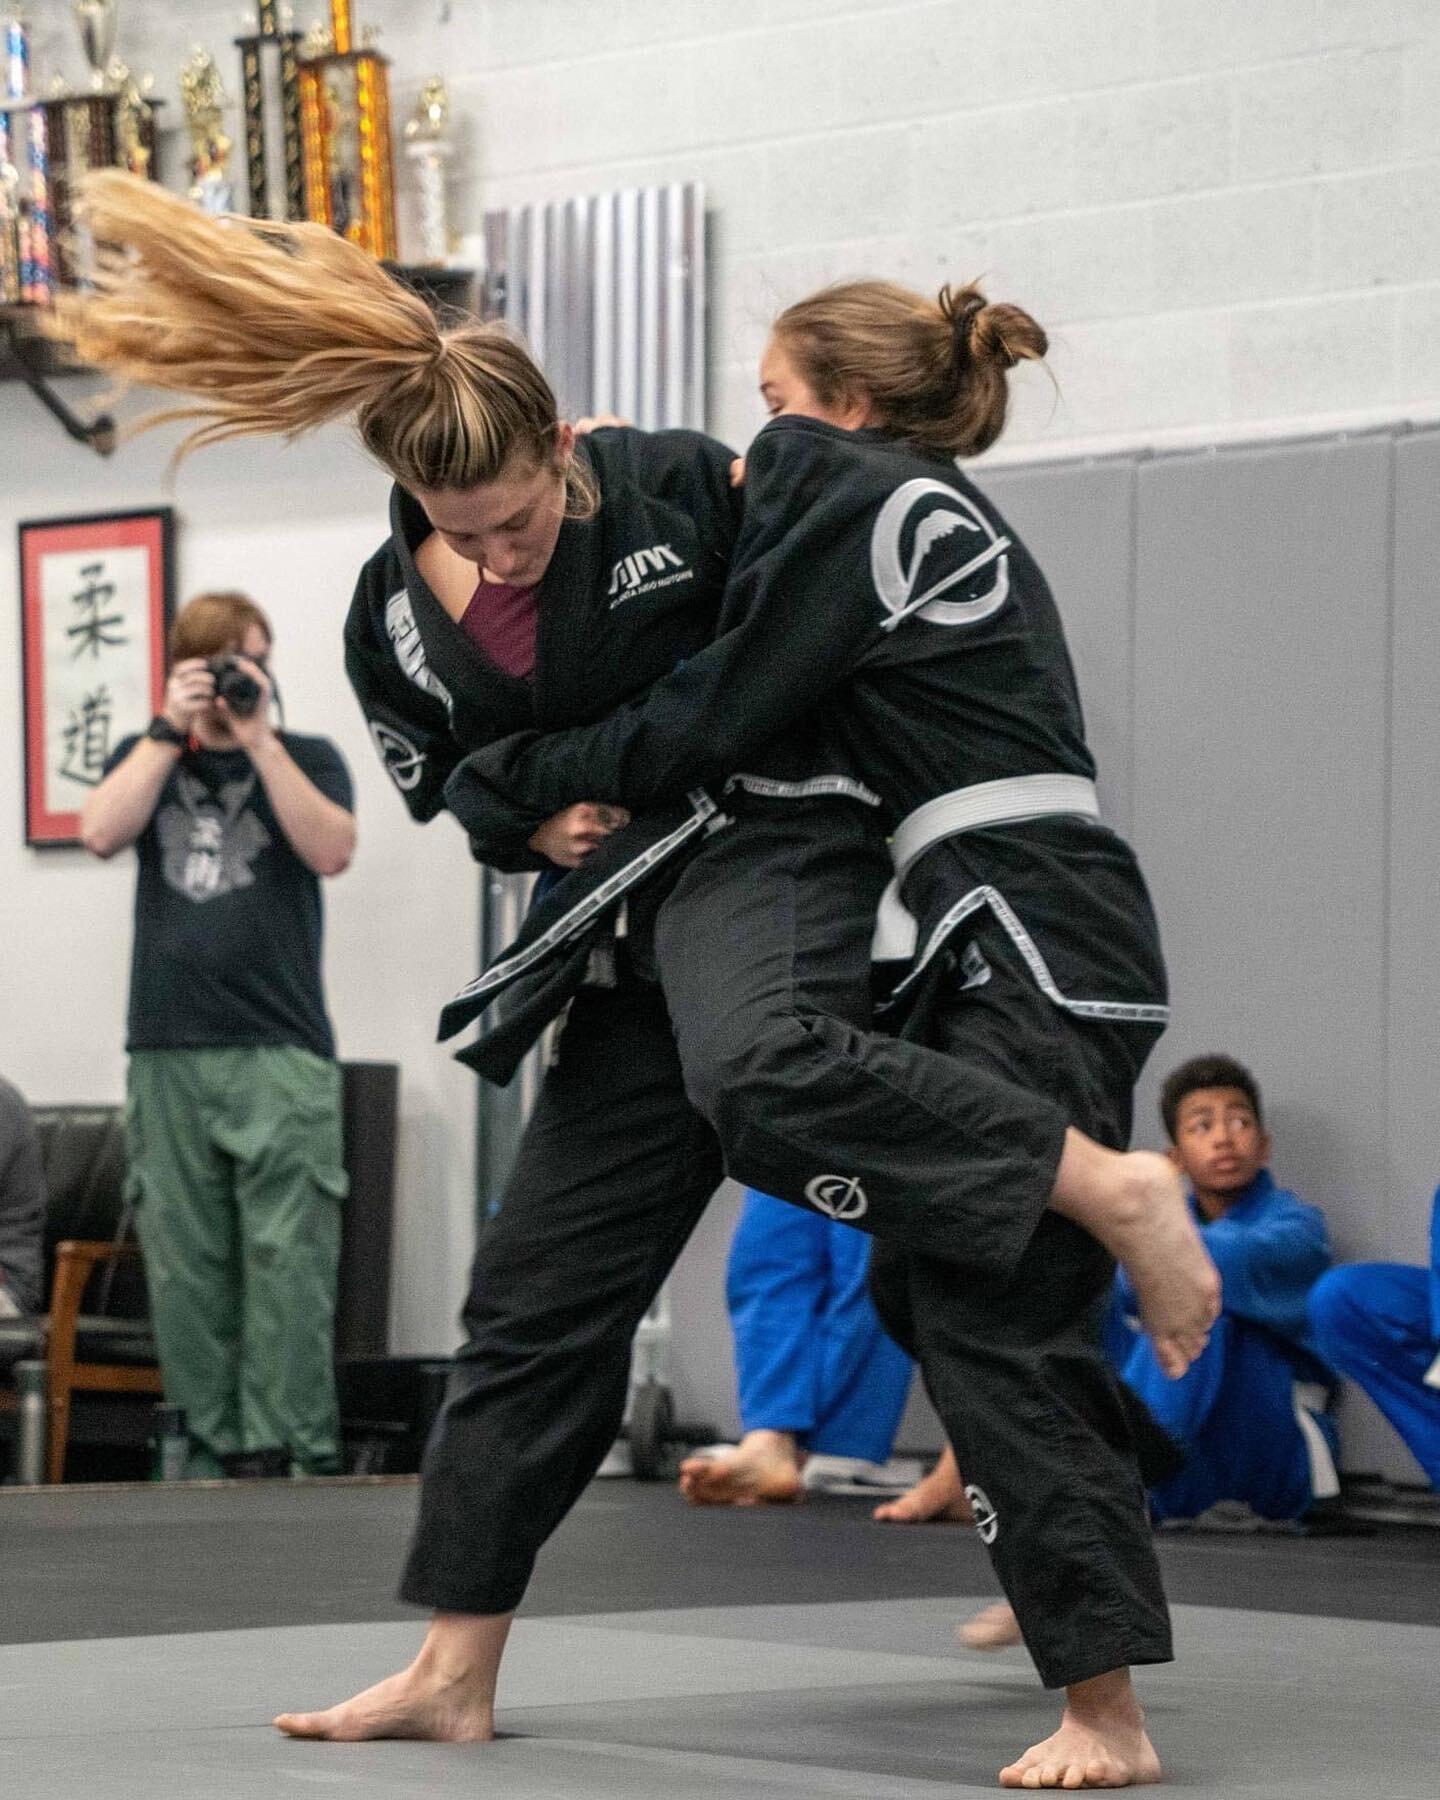 Photos from our In-House Tournament and Grand Reopening! Special thanks to Cameron Braun for capturing the images 📸 #judo #martialarts #atlanta #randori #judolife #judotraining #osu